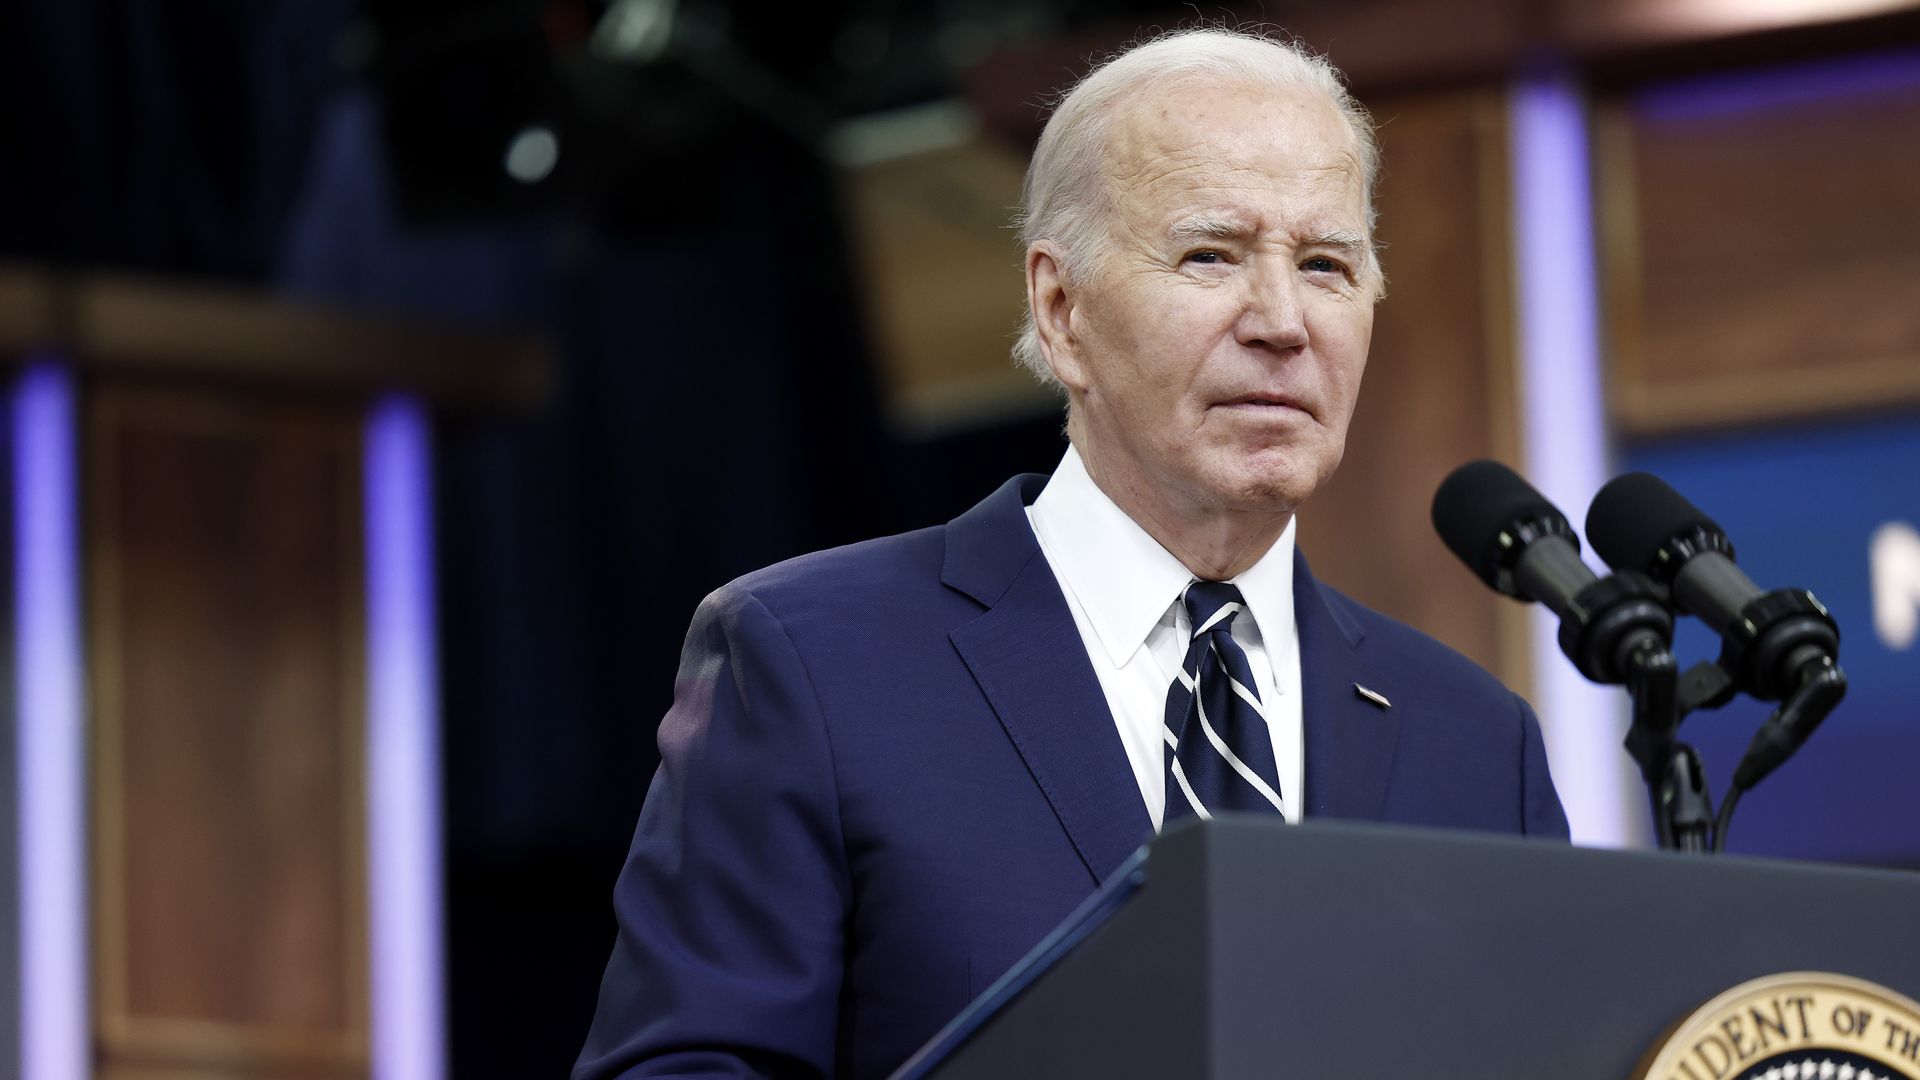 Biden: The United States Does Not Support a Counterattack in Iran